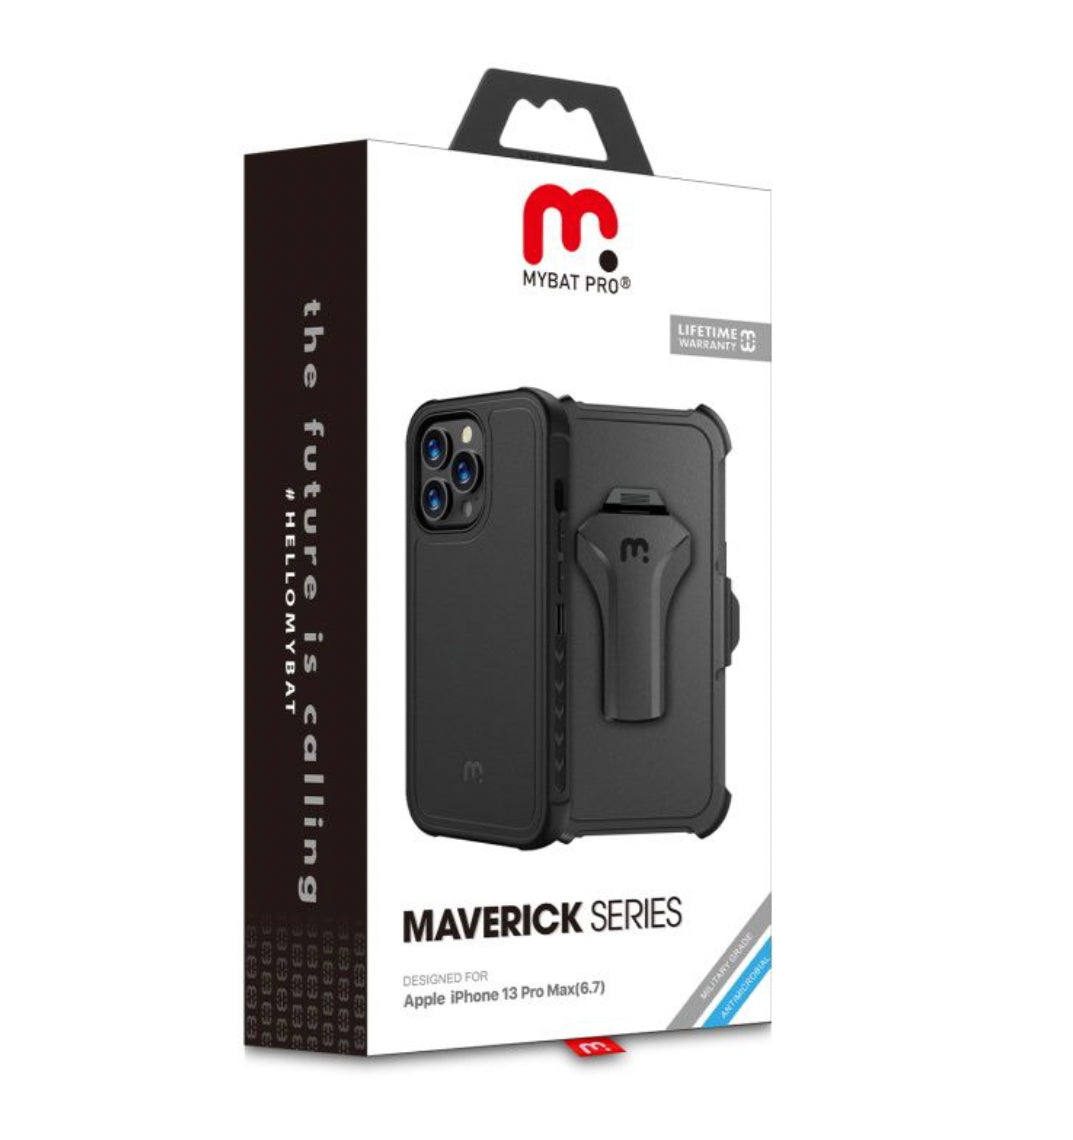 IPhone 13 Pro Max (6.7) Premium Case W/ Holster Clip & Tempered Glass